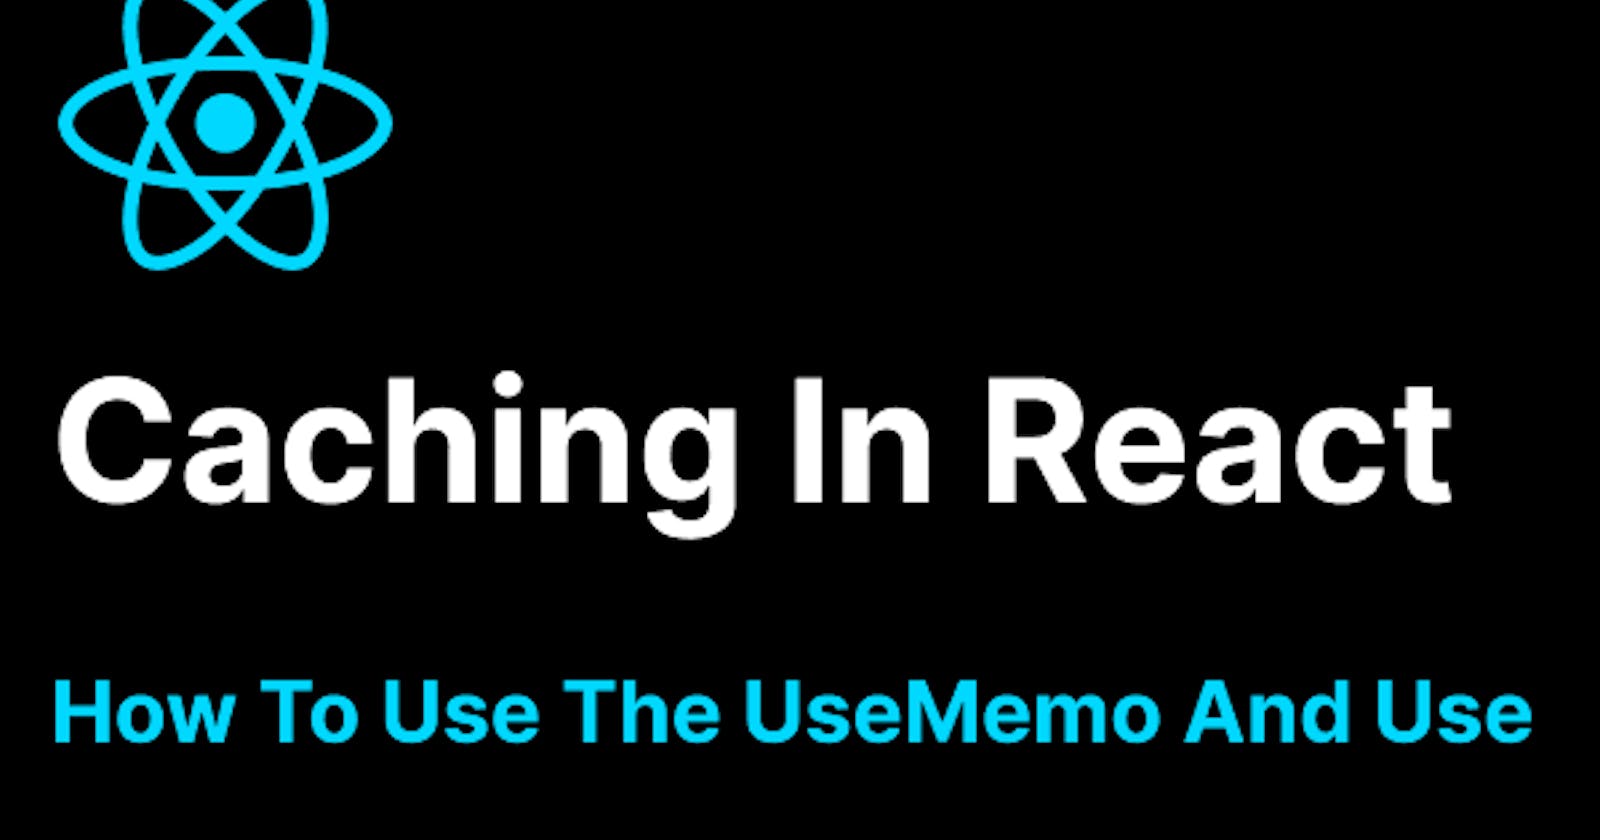 Caching in React – How to Use the useMemo and use callback Hooks